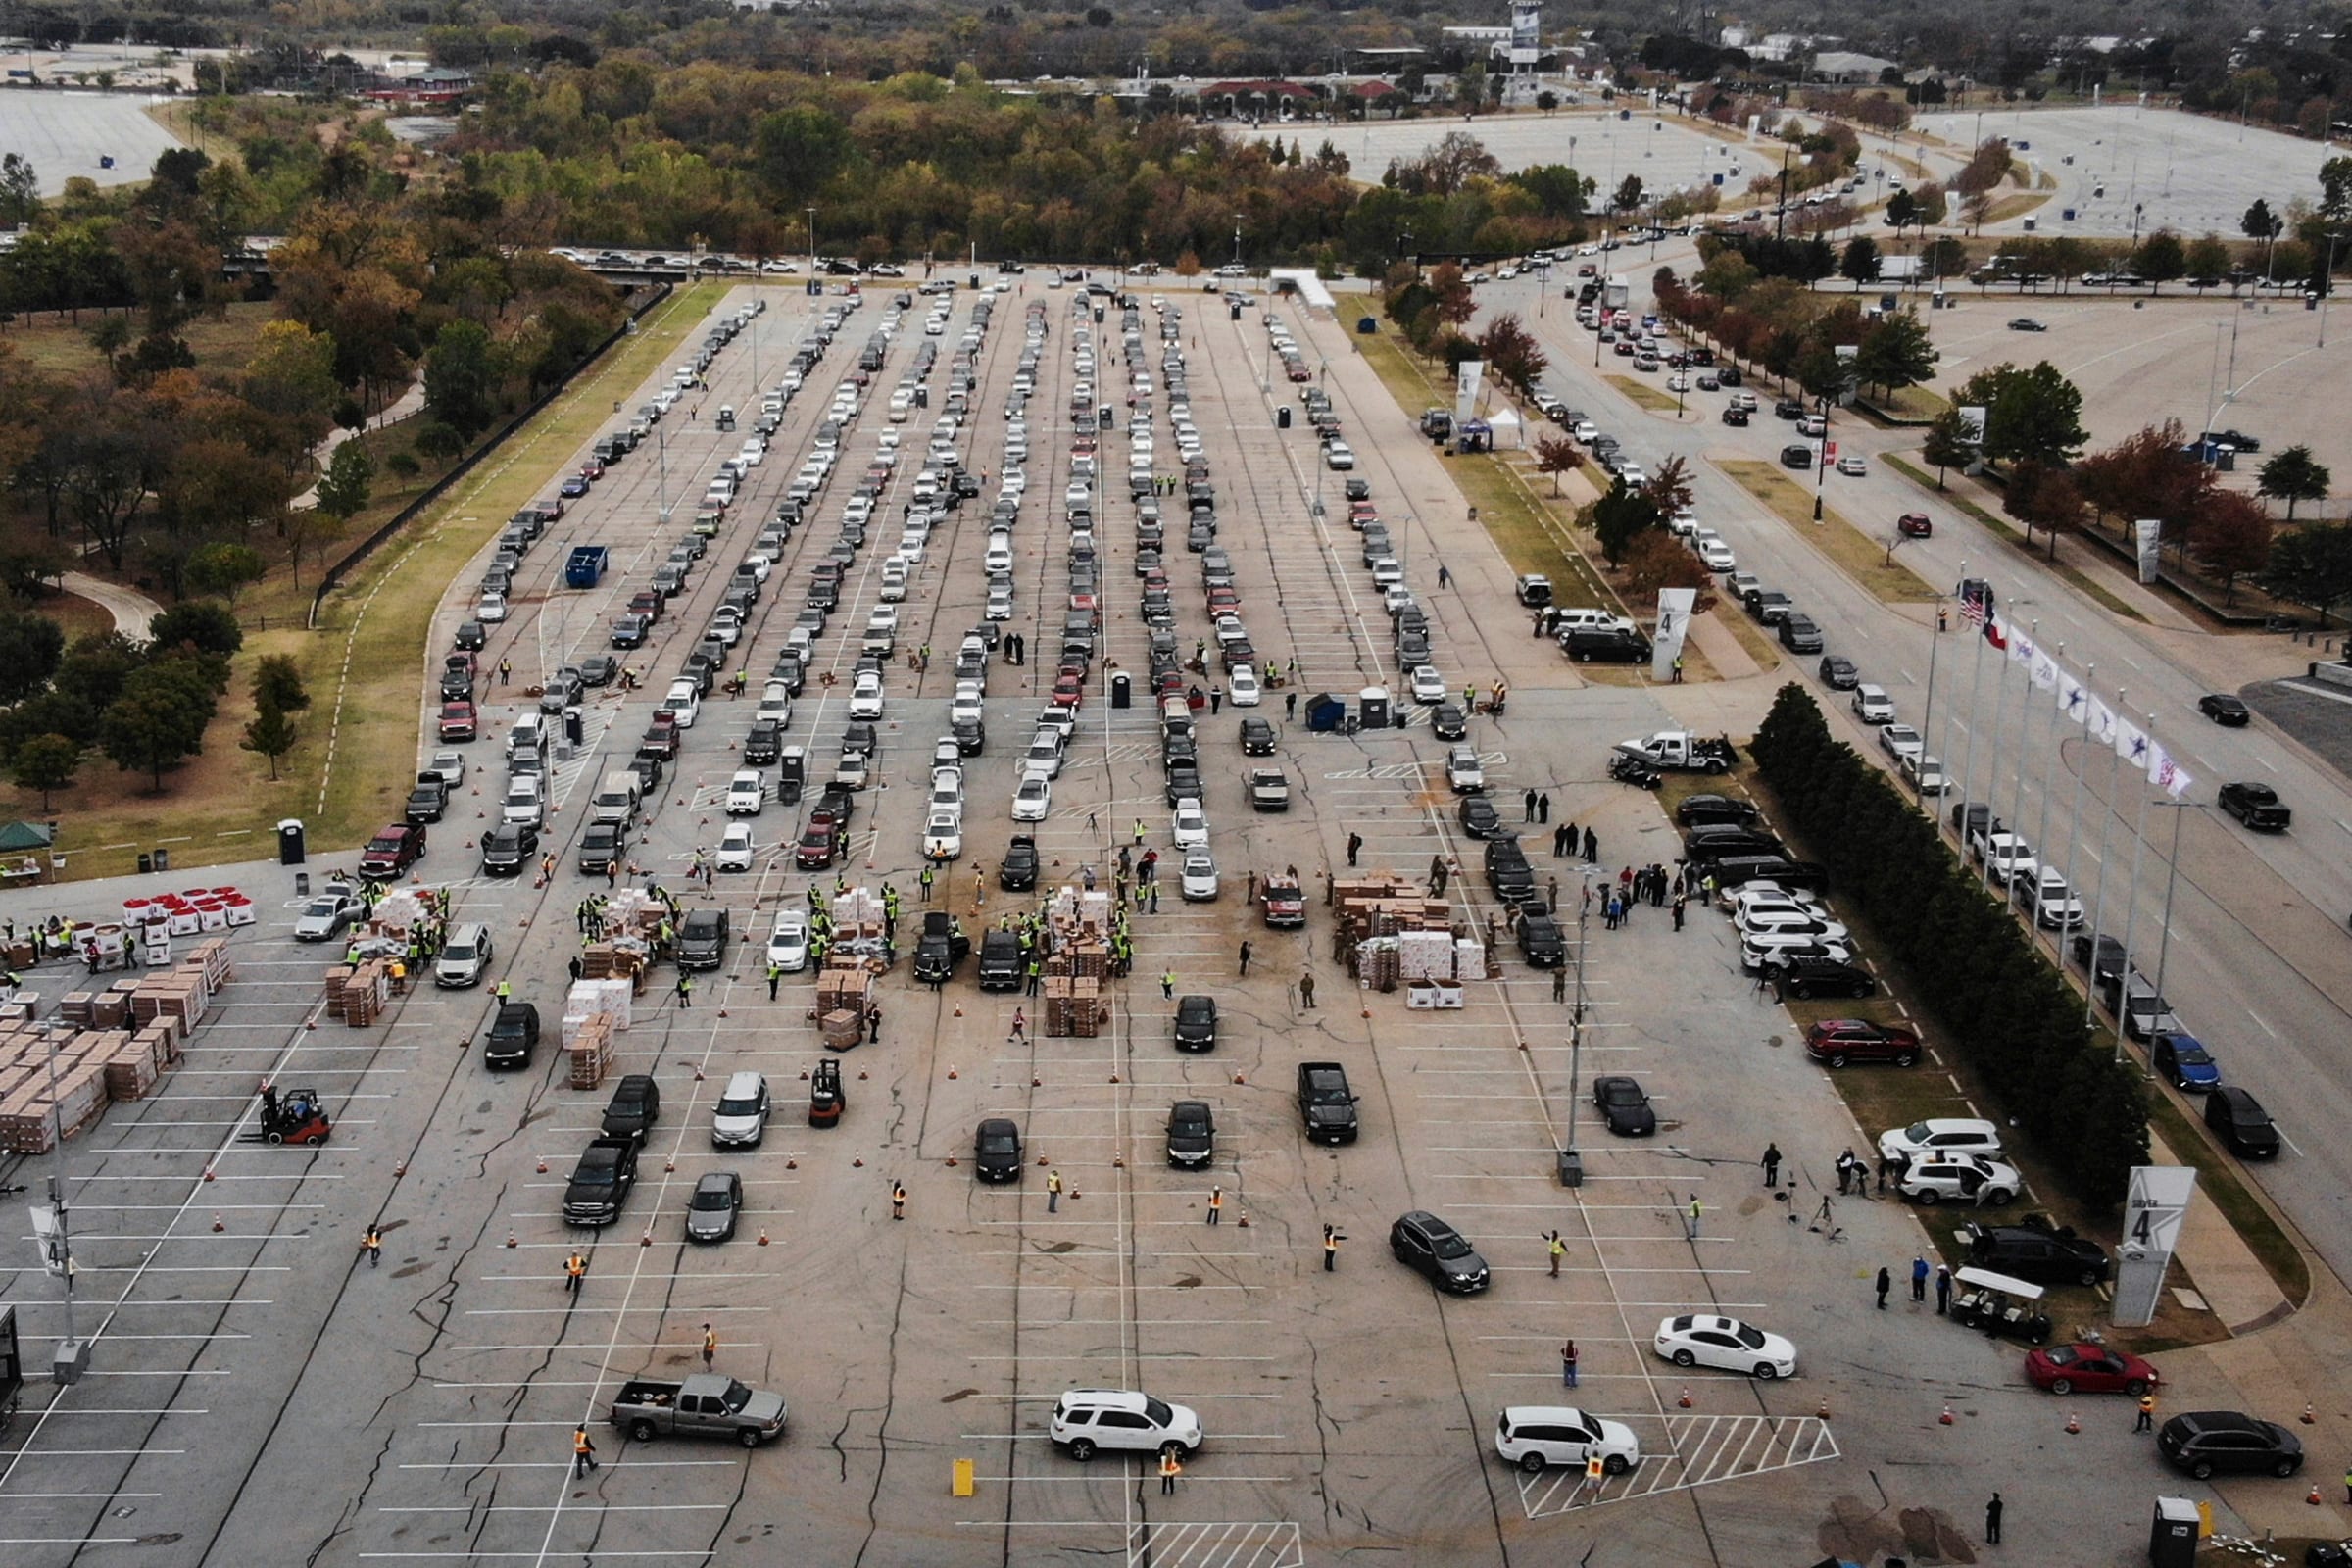 People line up in their cars to receive Thanksgiving meal boxes, which include a turkey and pantry items, from the Tarrant Area Food Bank in Arlington, Texas, on Nov. 20.